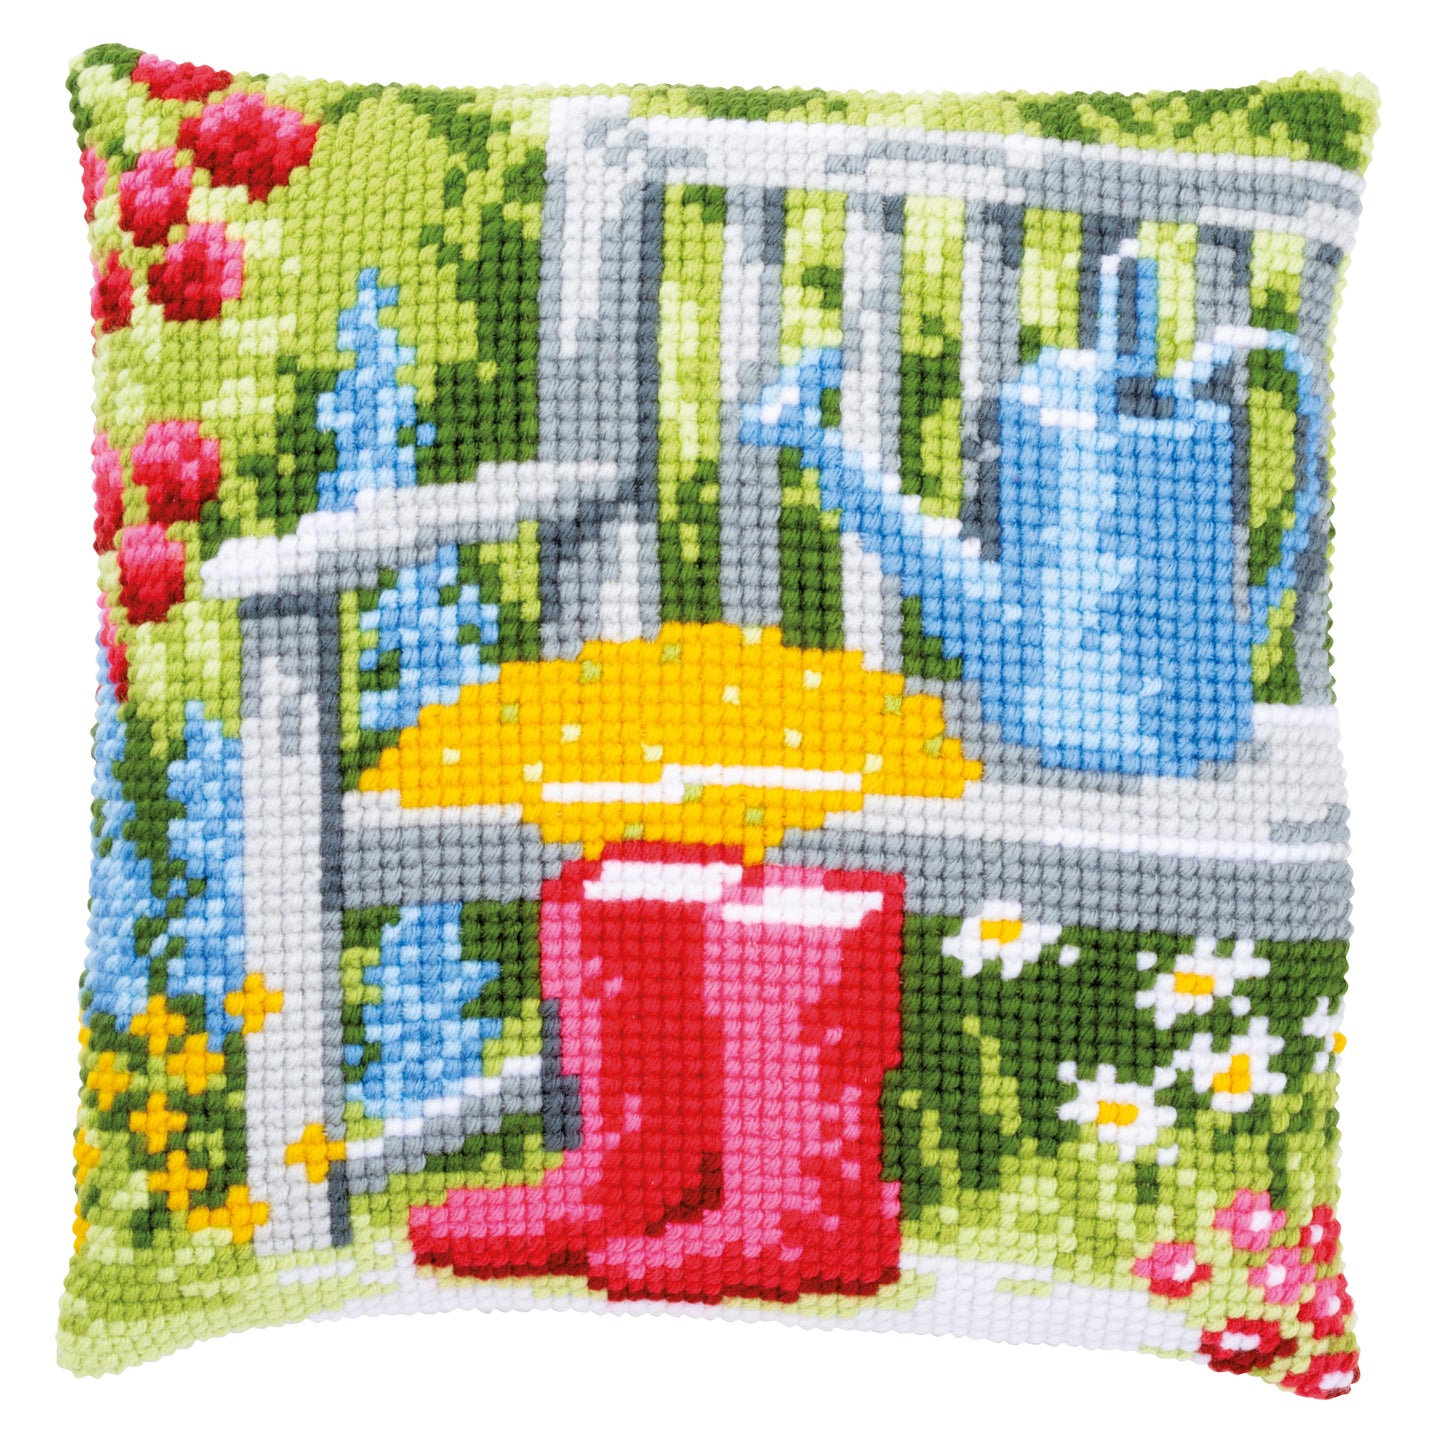 My Garden Large Holed Cross Stitch Cushion Kit by Vervaco